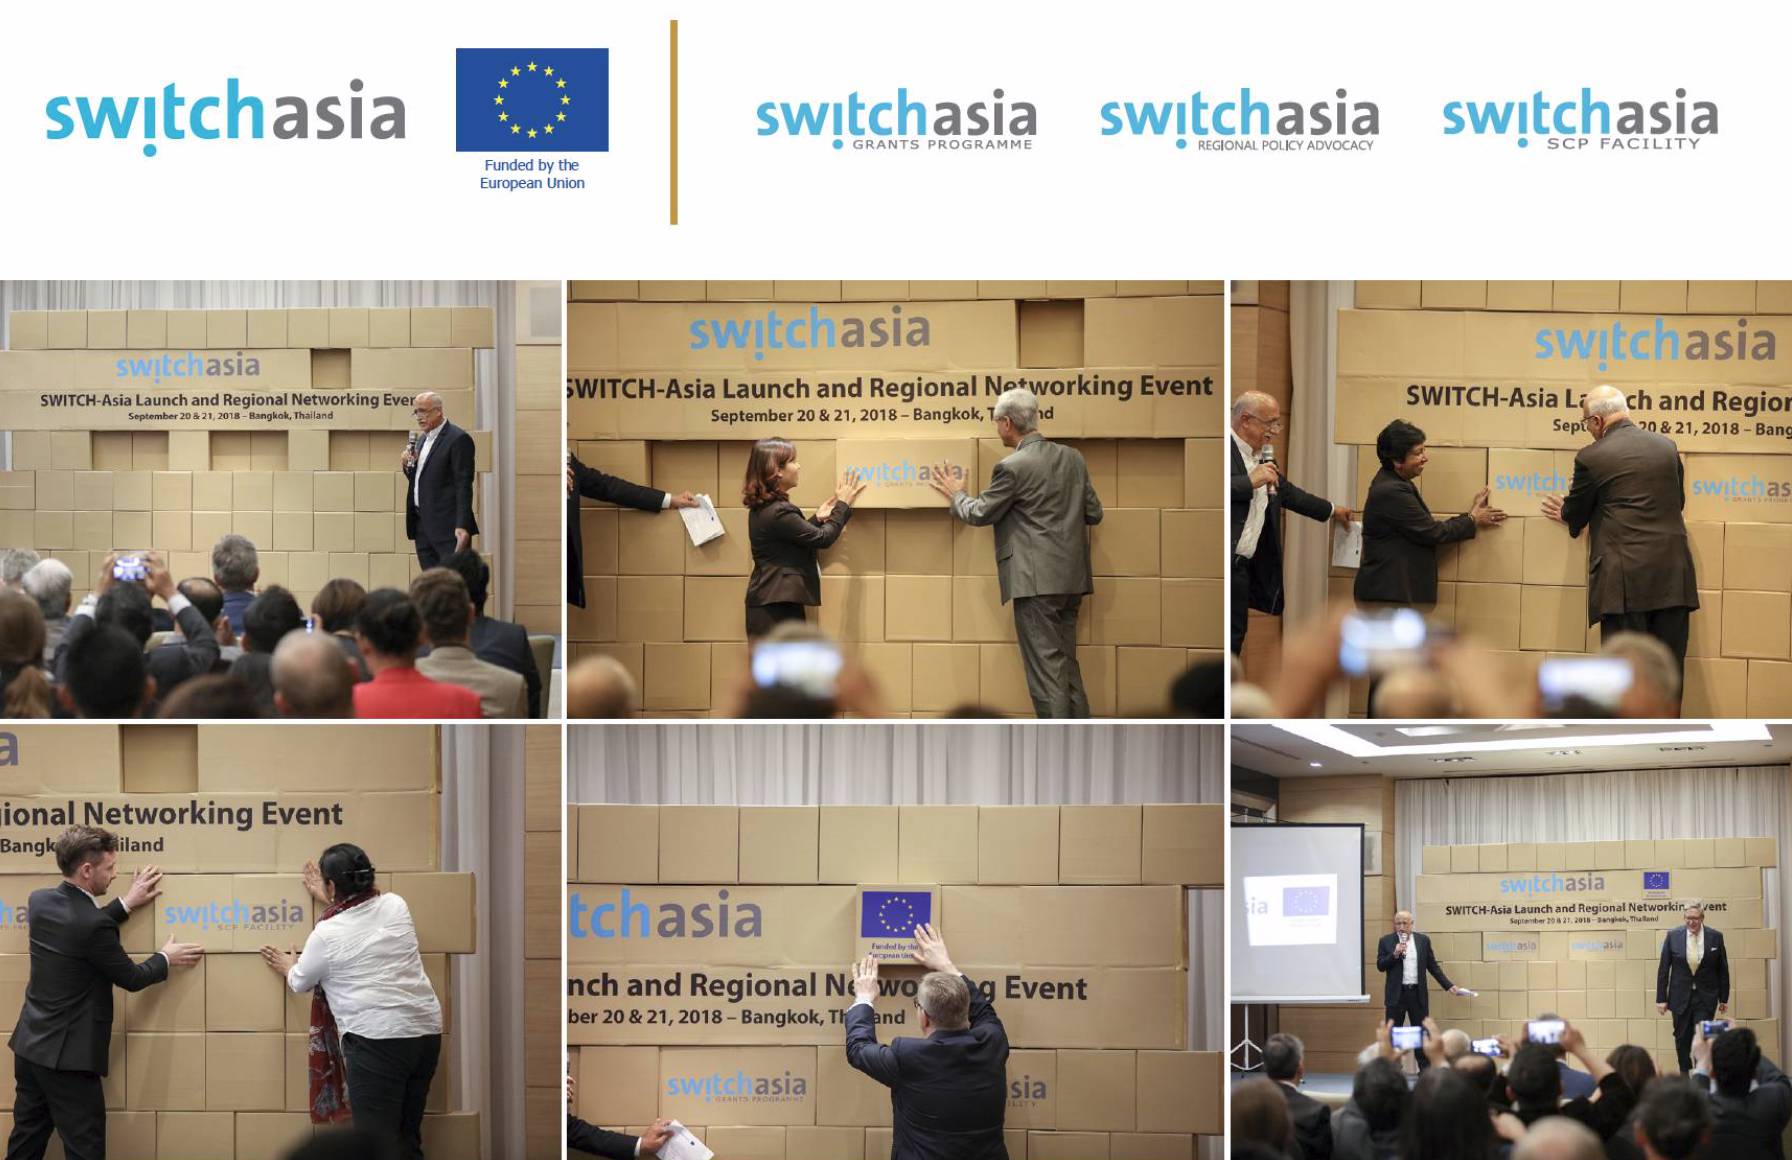 Media Advisory: European Union to Renew Commitment to Greening Asia with 11 New Projects at Regional Launch and Networking Events